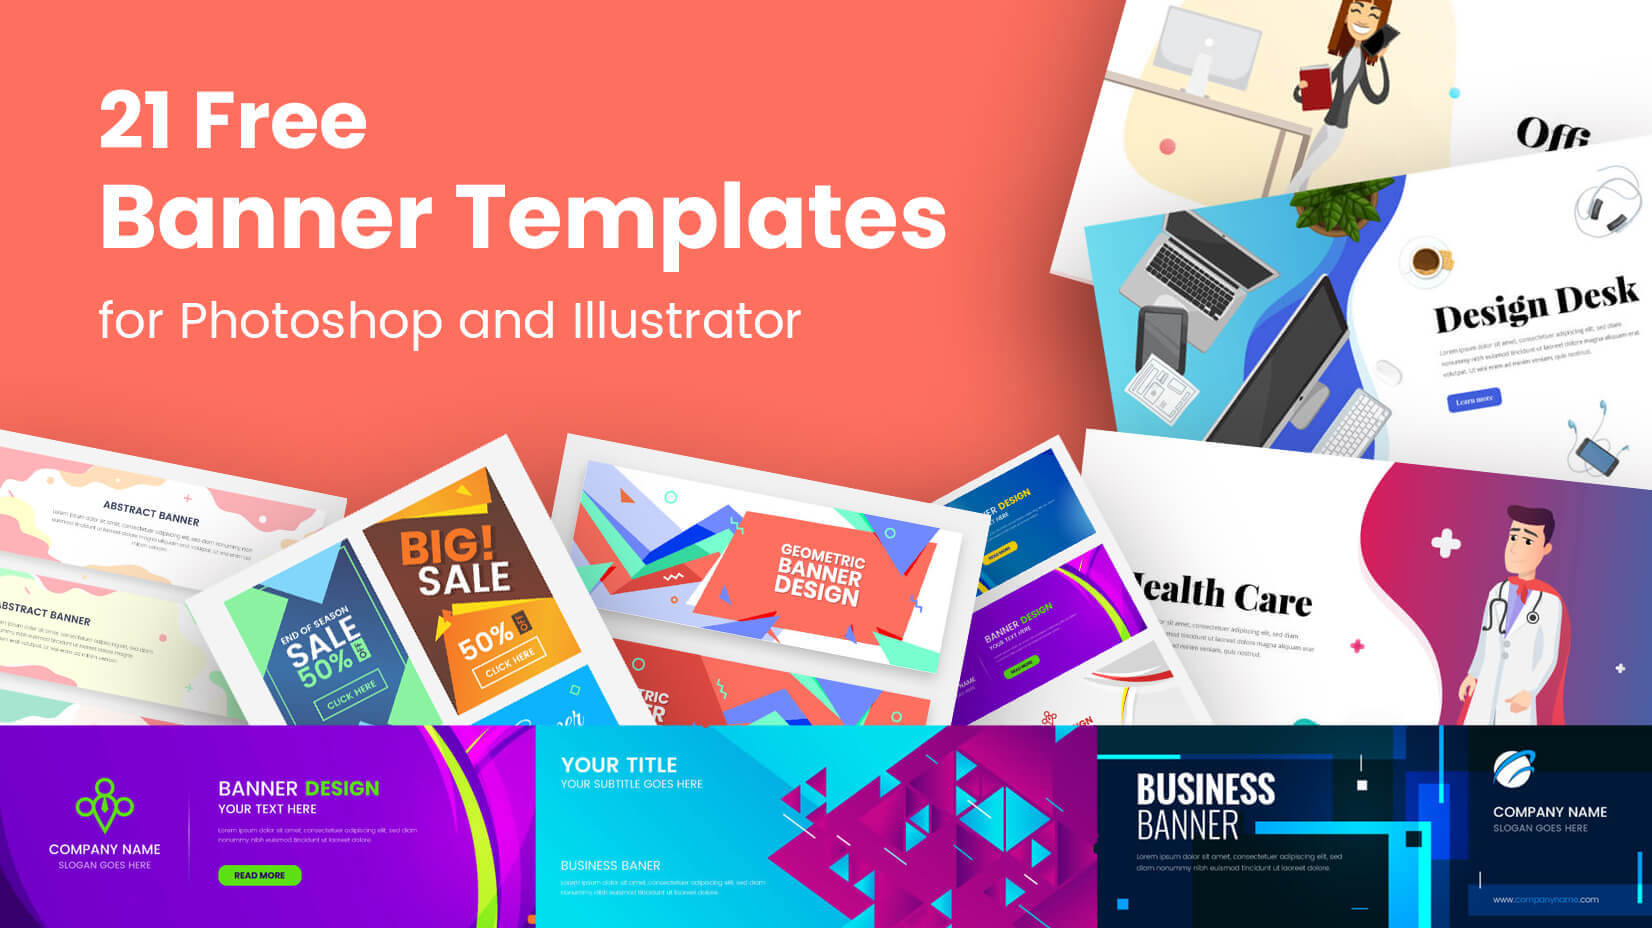 21 Free Banner Templates For Photoshop And Illustrator Regarding Adobe Photoshop Banner Templates